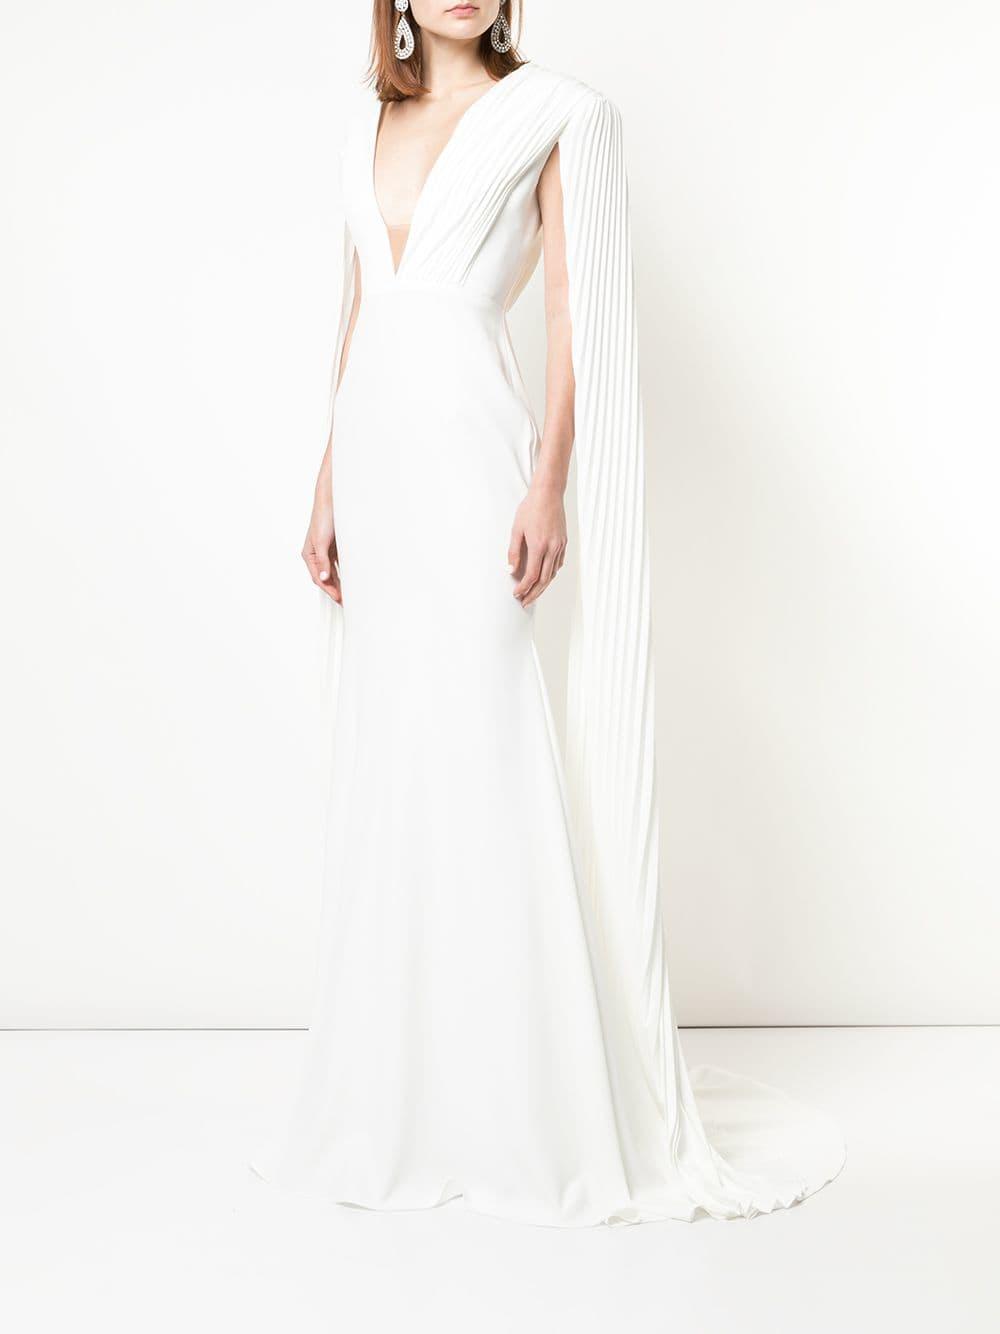 Alex Perry Plunge Cape Gown in White | Lyst